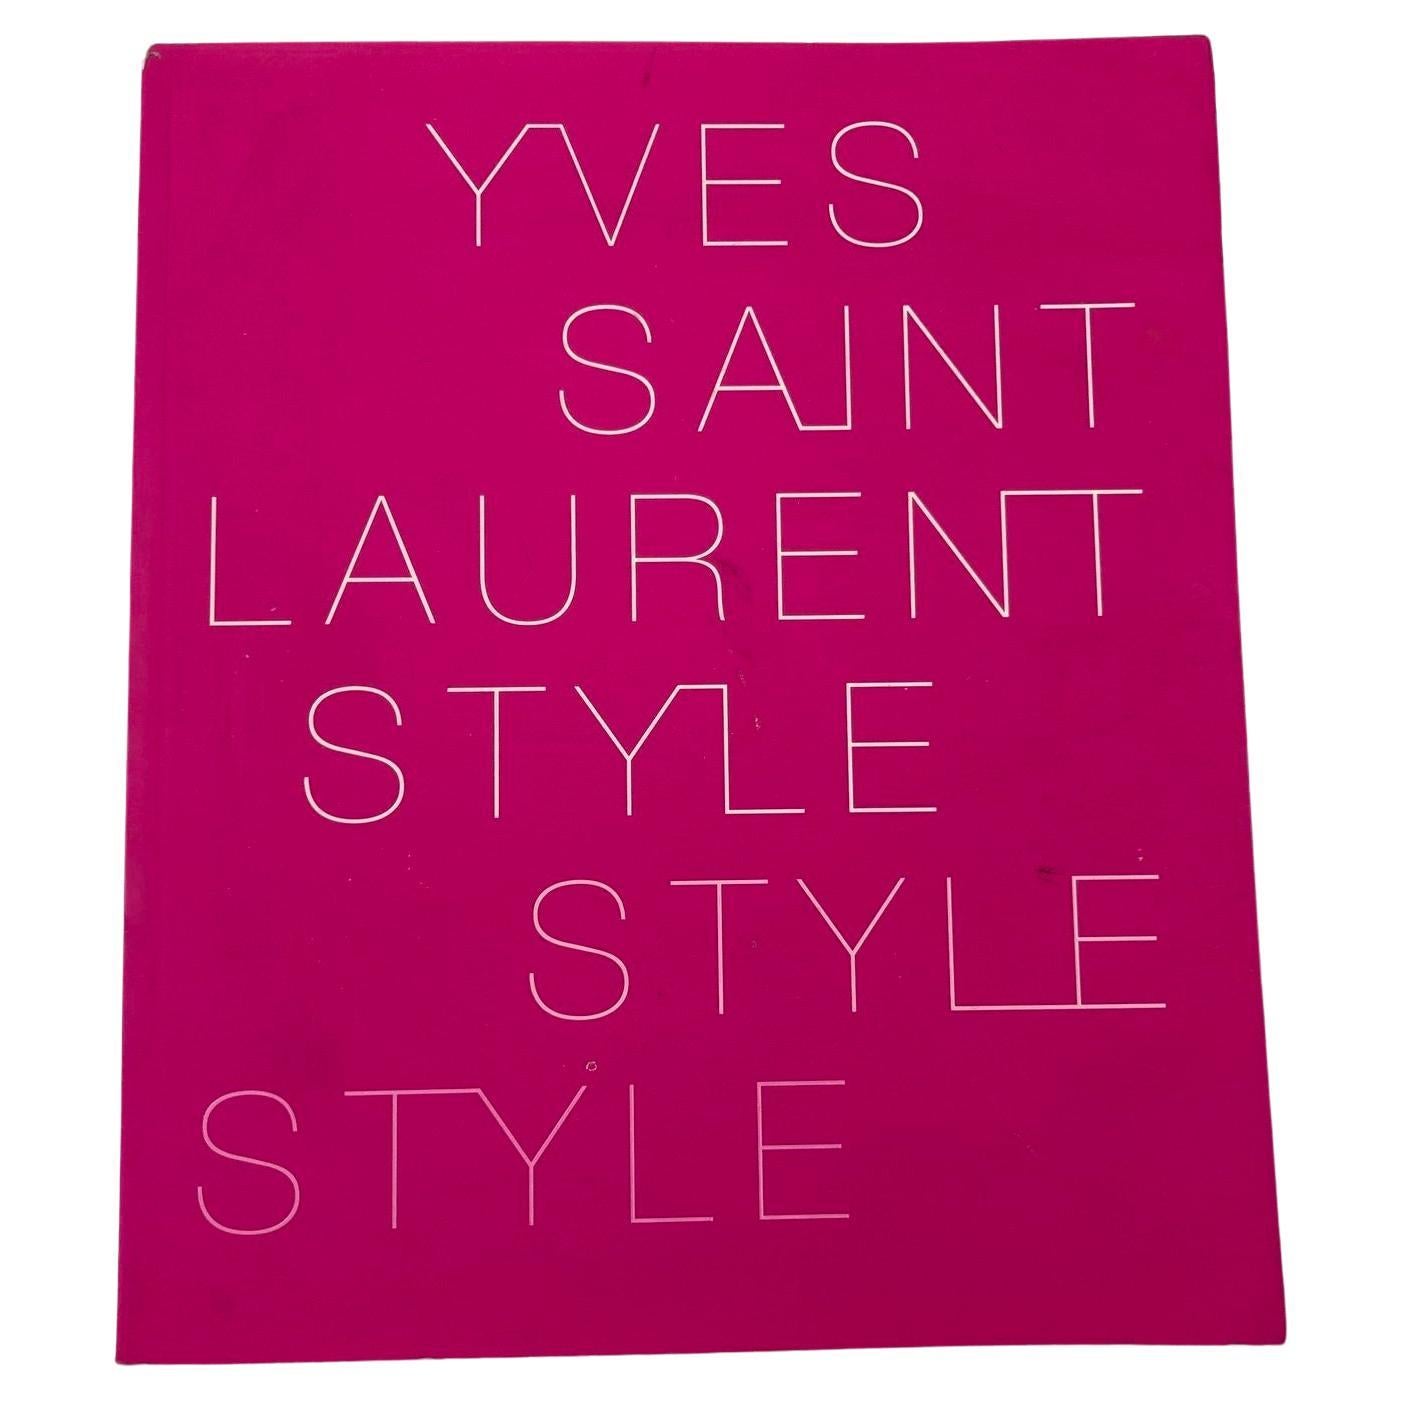 Yves Saint Laurent Style Paperback 2008 Pink book by Foundation Pierre Berge For Sale